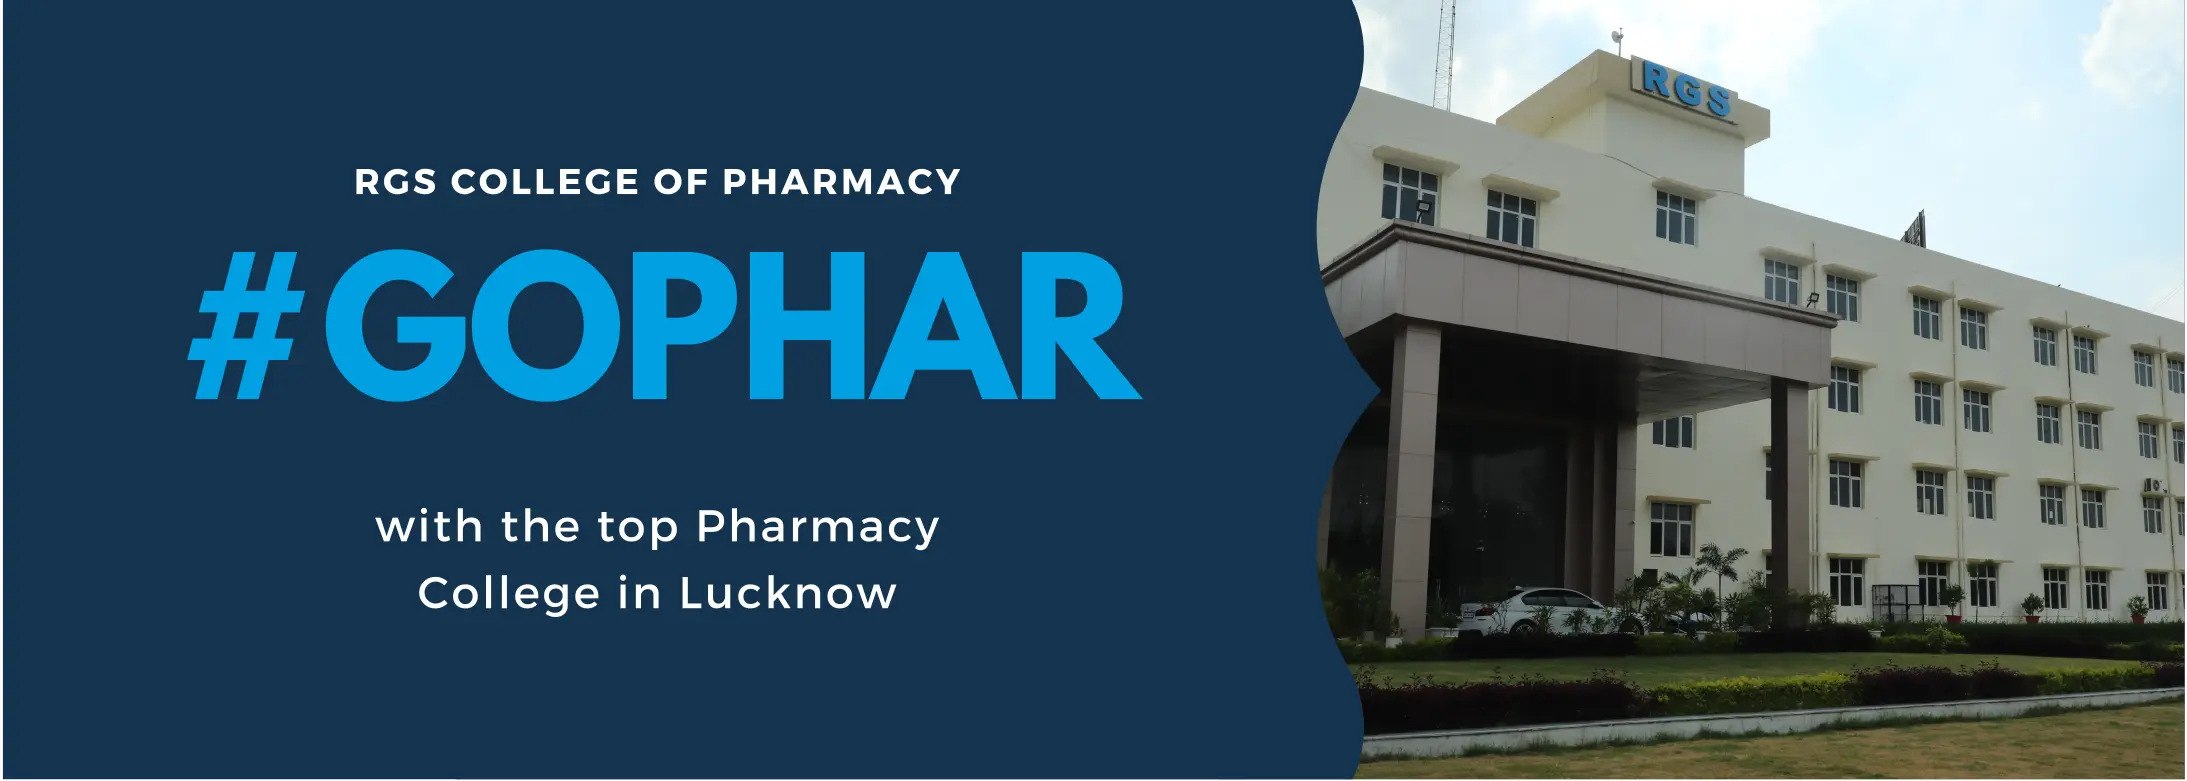 RGS College: Your Partner in Pharmacy Education